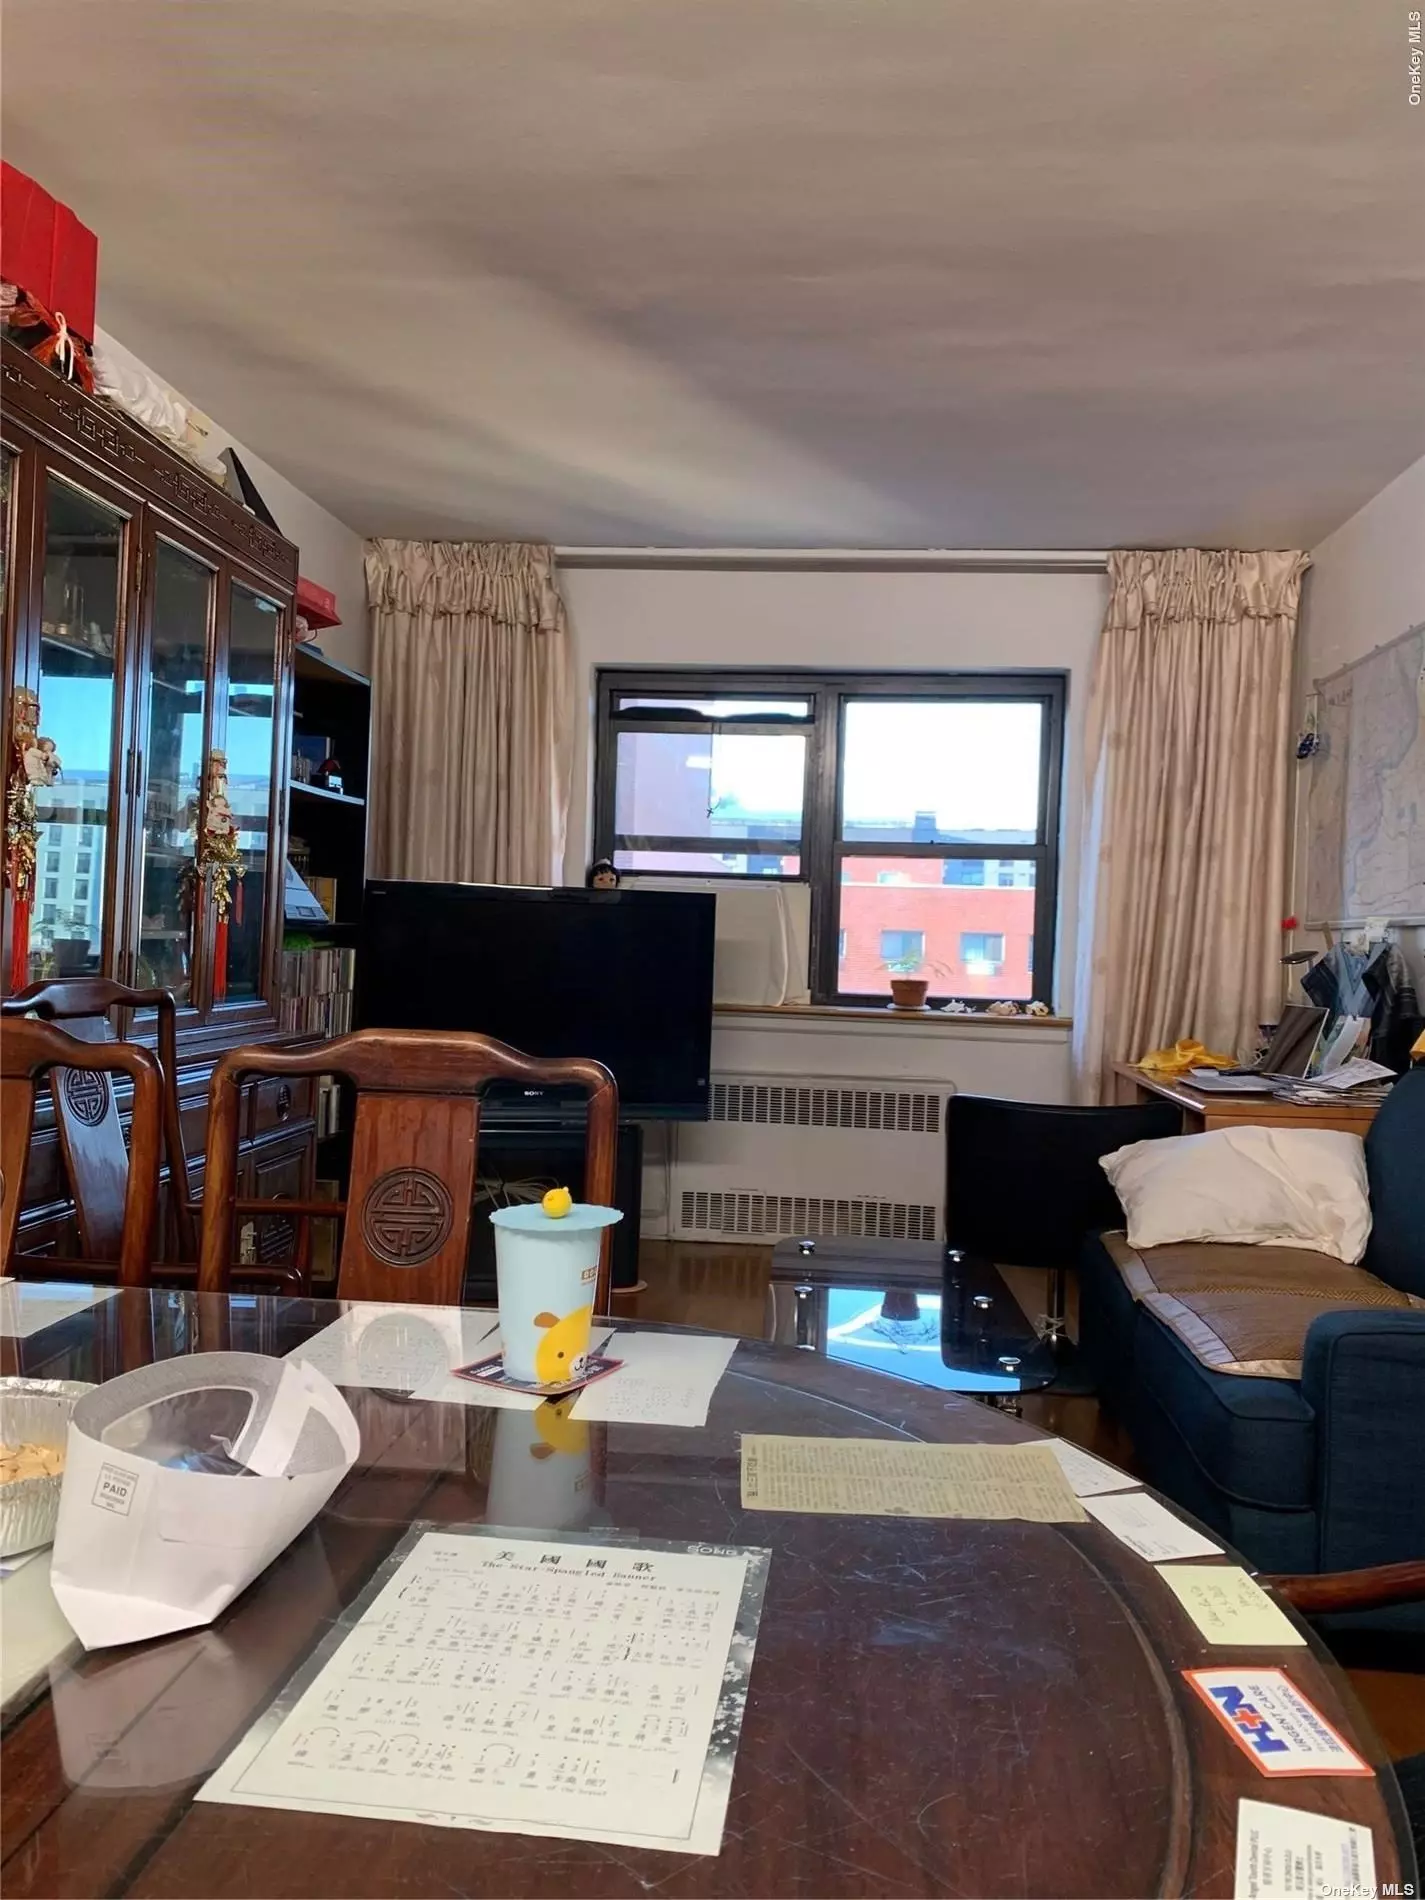 Elevator Building , 2Bedroom, 1 Full Bath, Living Room, Laundry Room In Building. Maintenance Includes All: Heat, Gas, Water, Electric . Indoor Parking Available ($180 Per Month). Conveniently Located In The Heart Of Flushing , Main Street By Public Transportation , Restaurants, Shopping, Library.